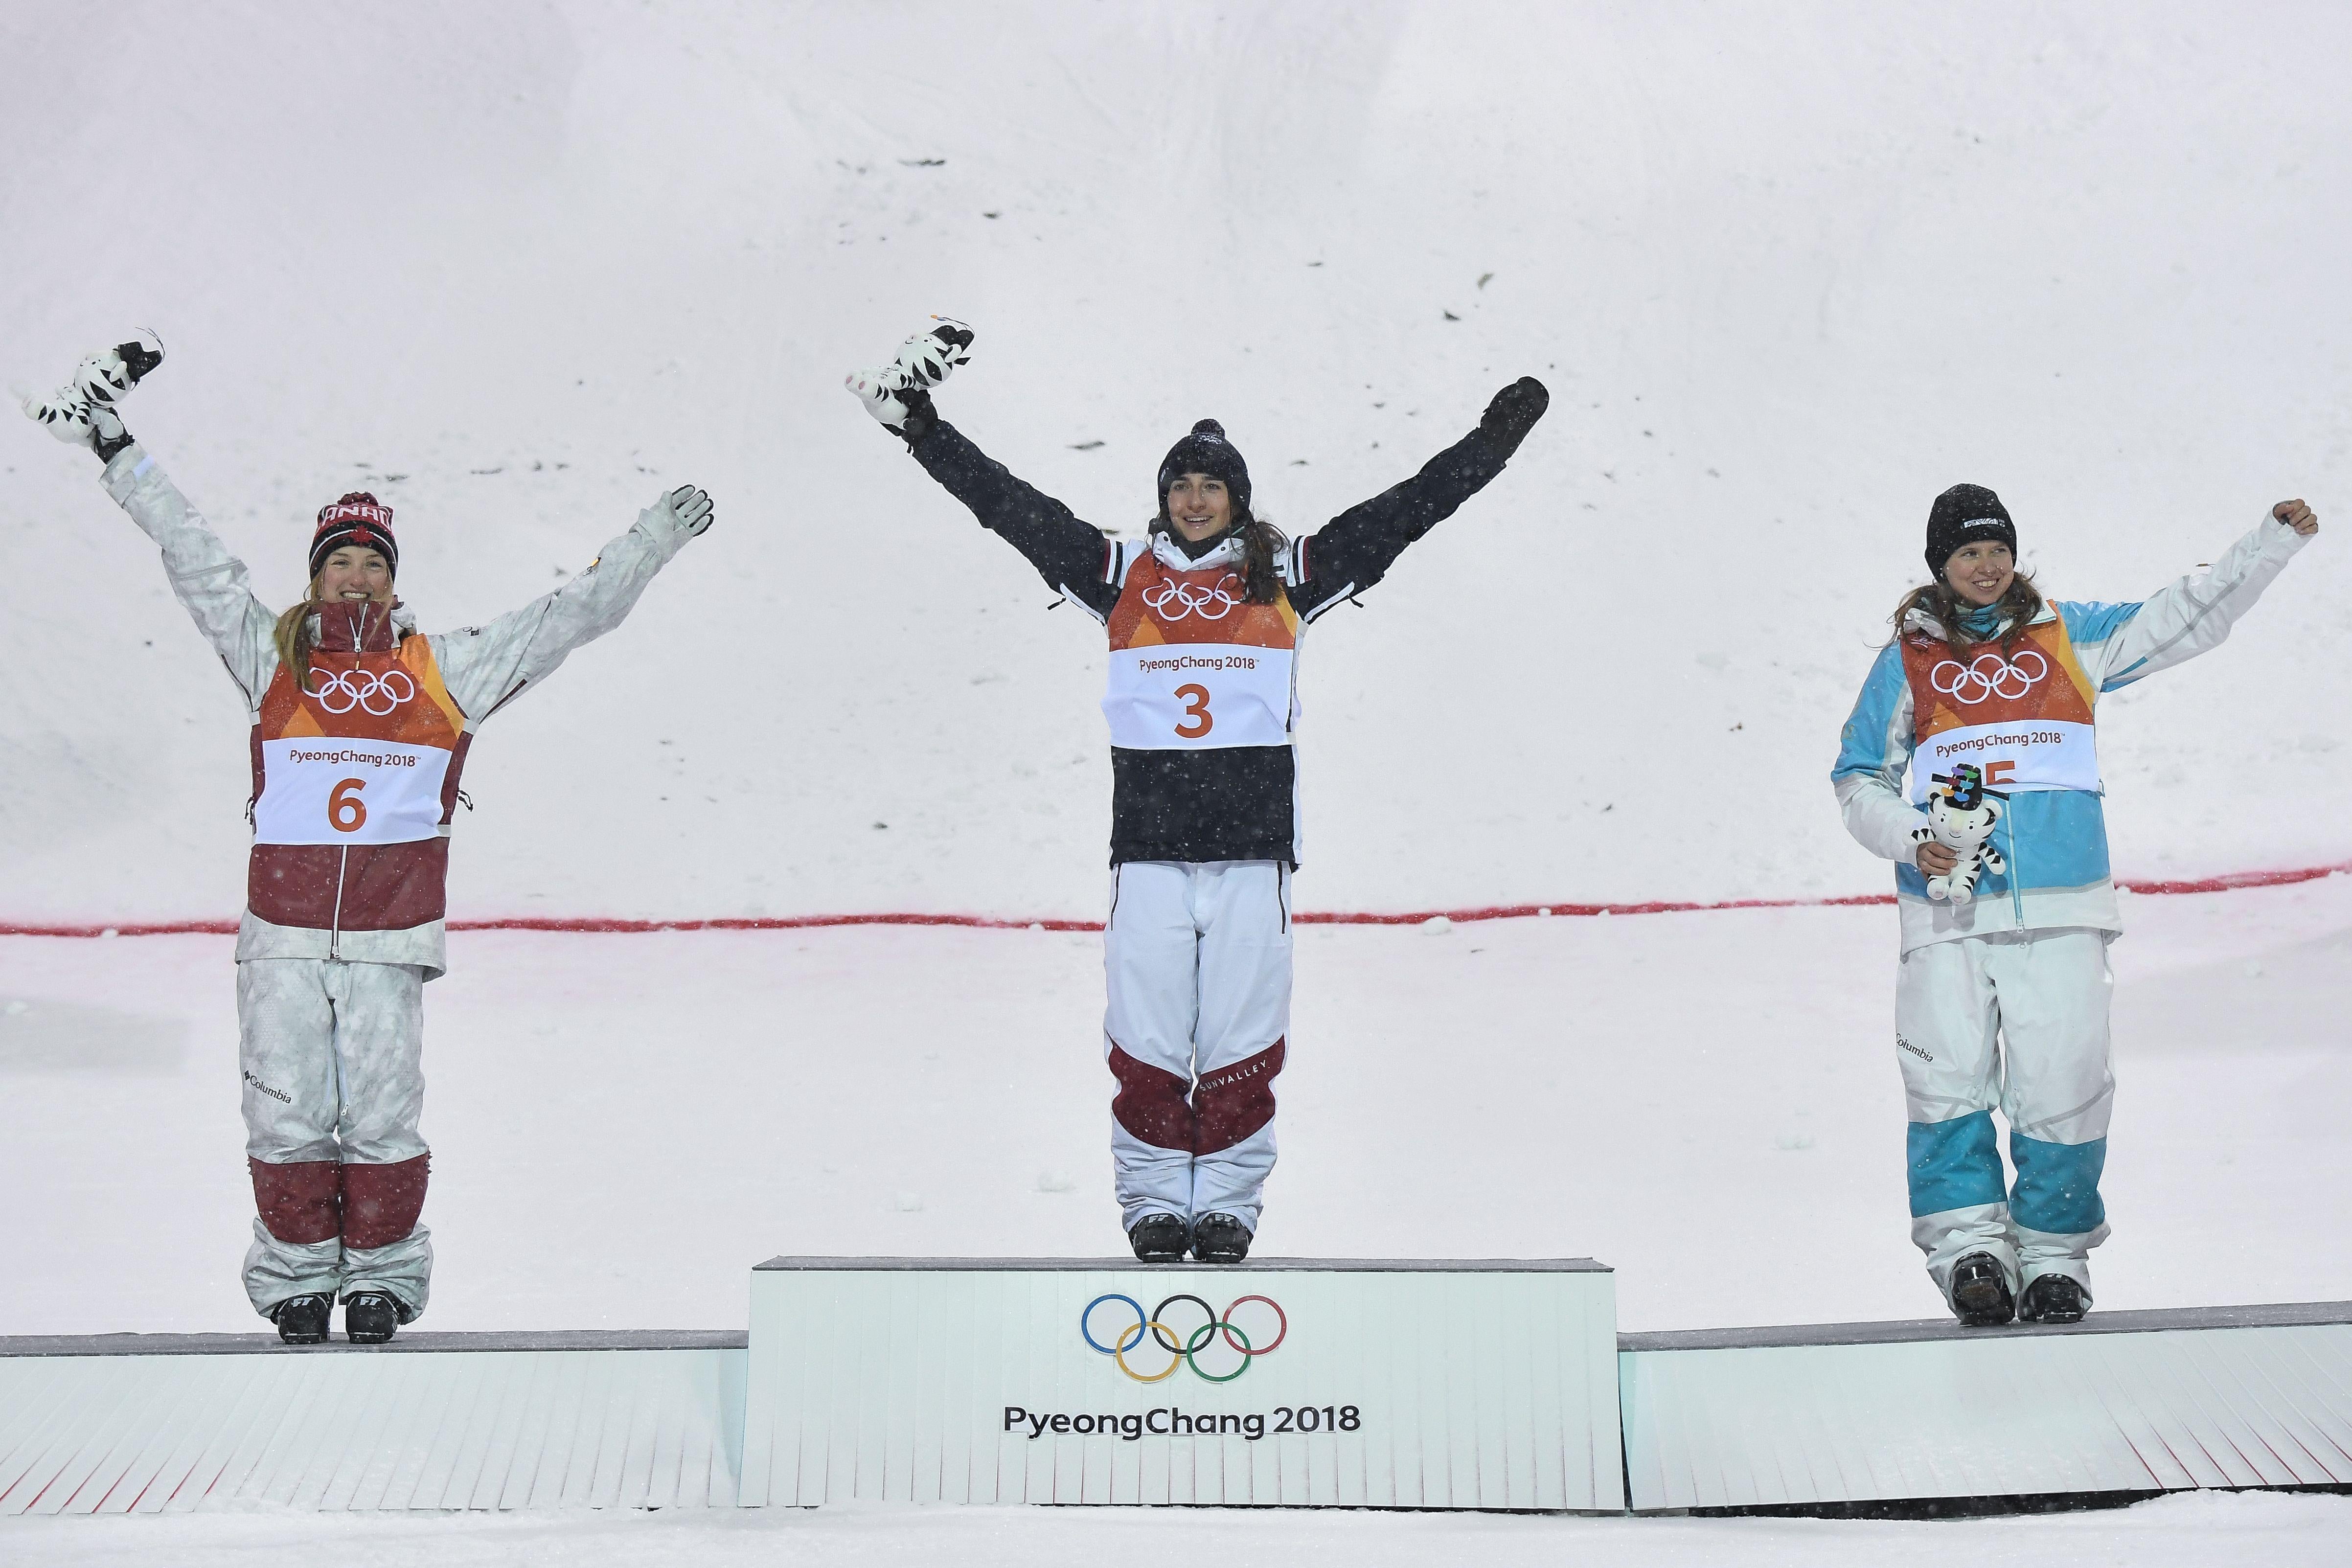 Canada's Justine Dufour-Lapointe, France's Perrine Laffont and Kazakhstan's Yulia Galysheva celebrate on the podium during the victory ceremony after the women's moguls final event.      